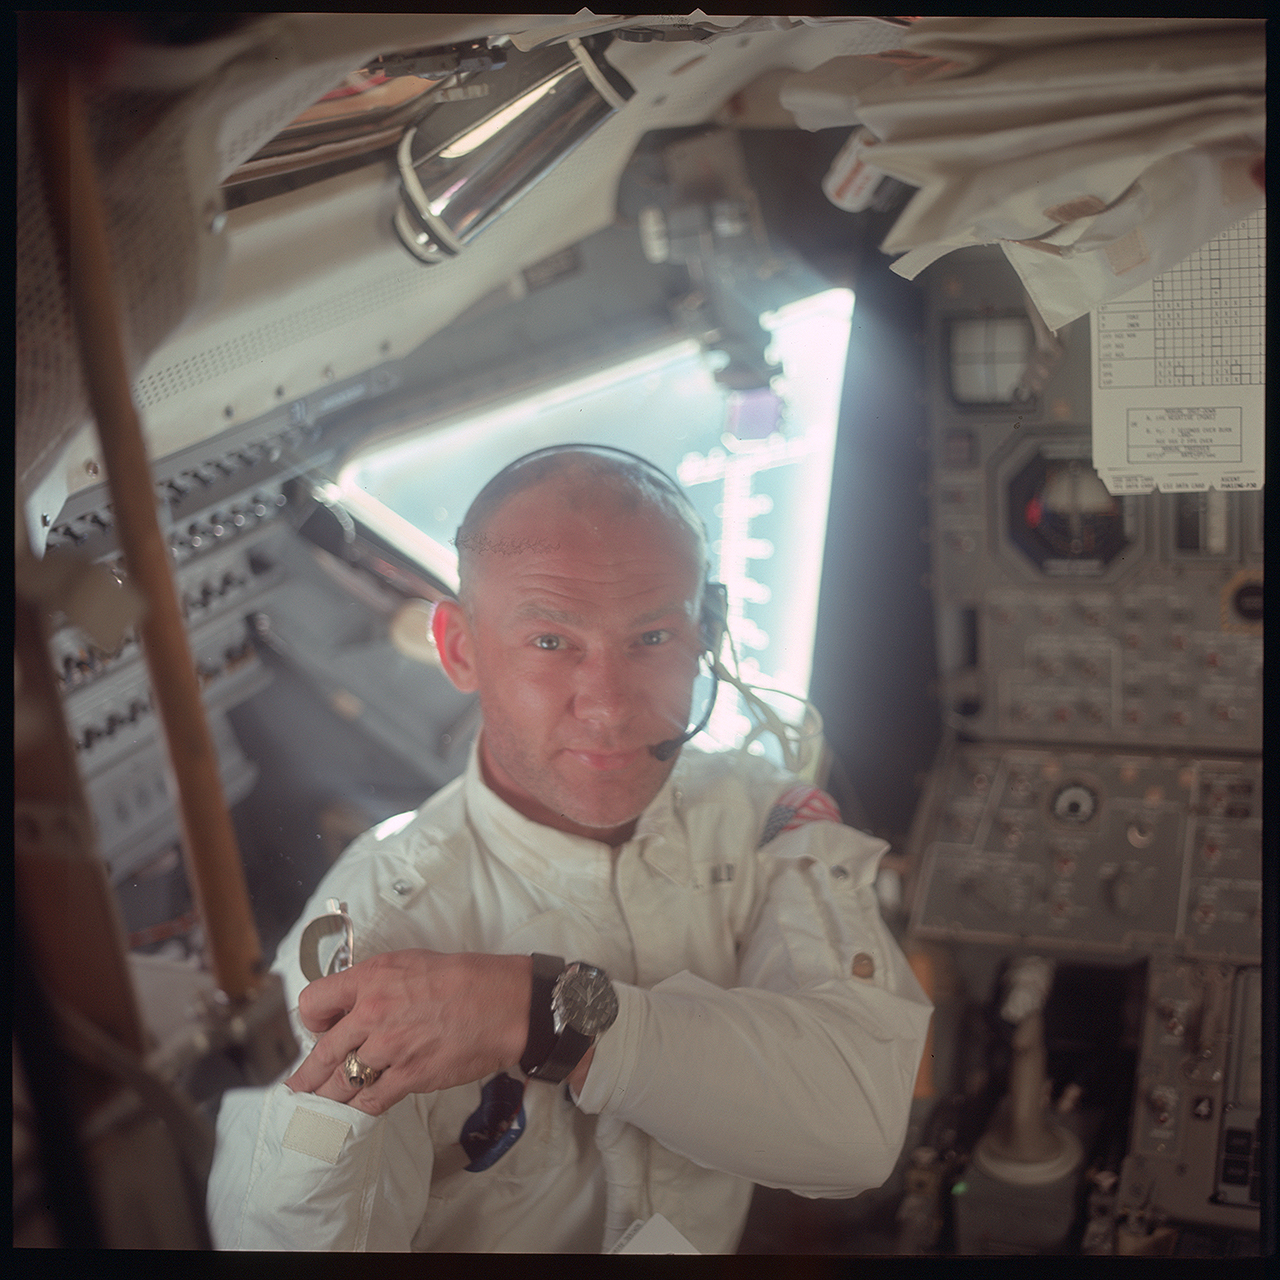 Apollo 11 lunar module pilot Buzz Aldrin wearing his inflight coverall jacket during the 1969 moon landing mission.